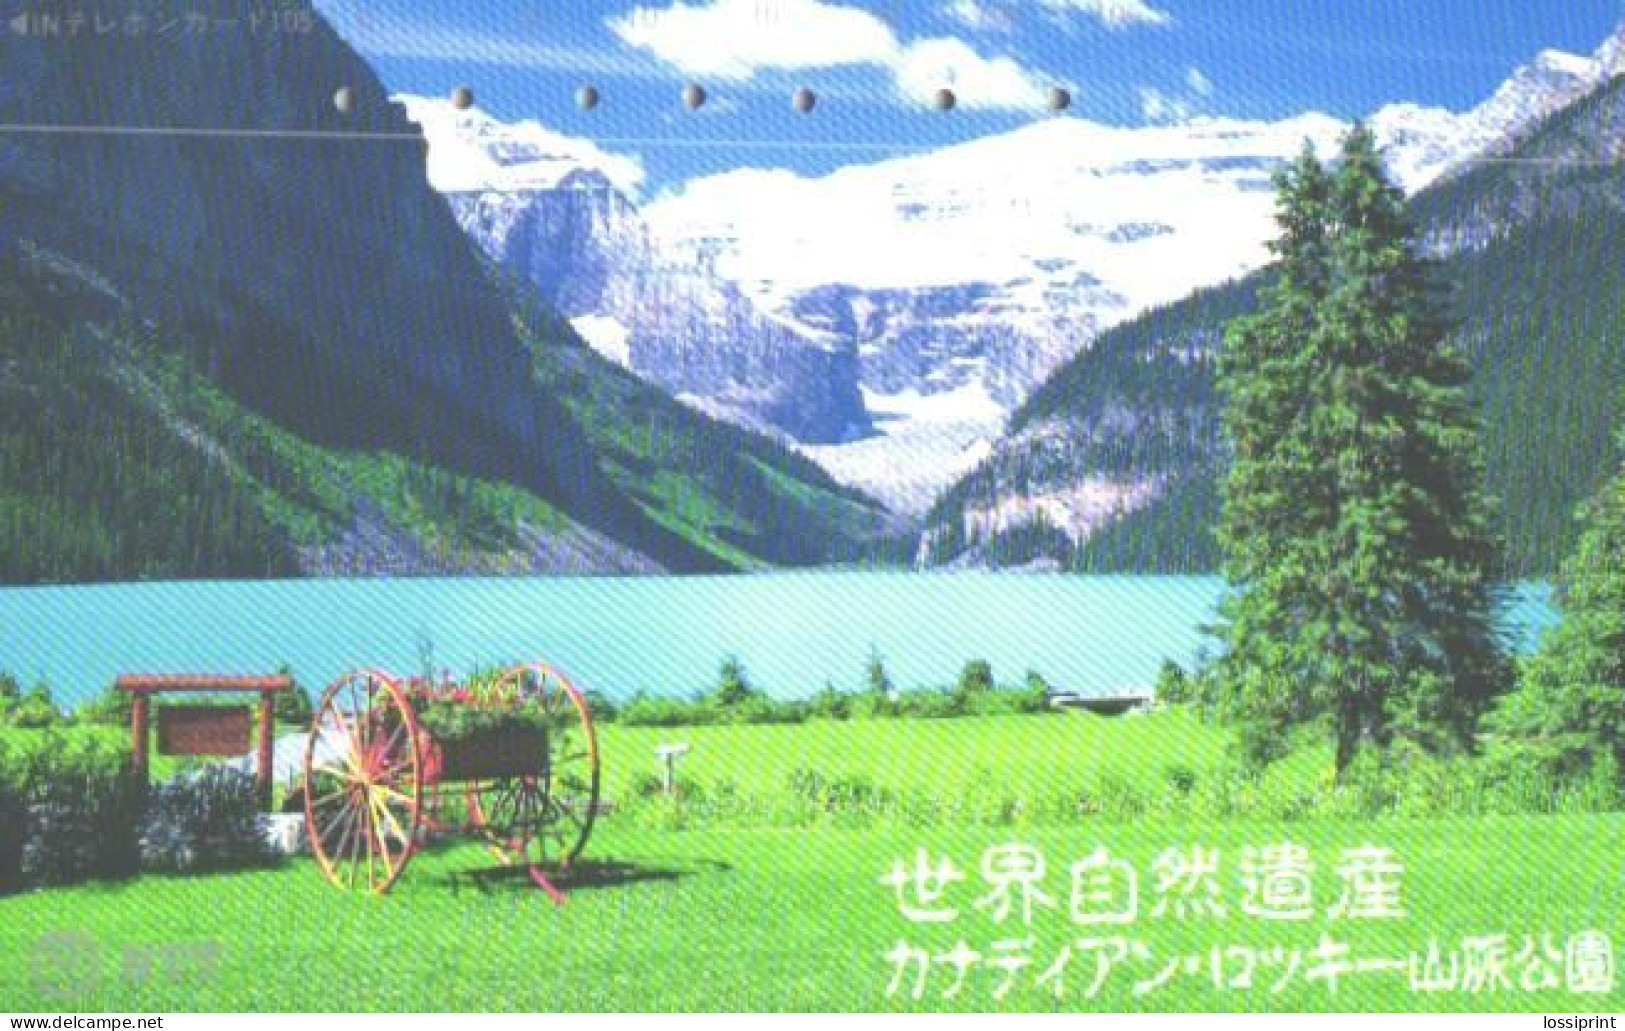 Japan:Used Phonecard, NTT, 105 Units, Lake And Mountains - Mountains